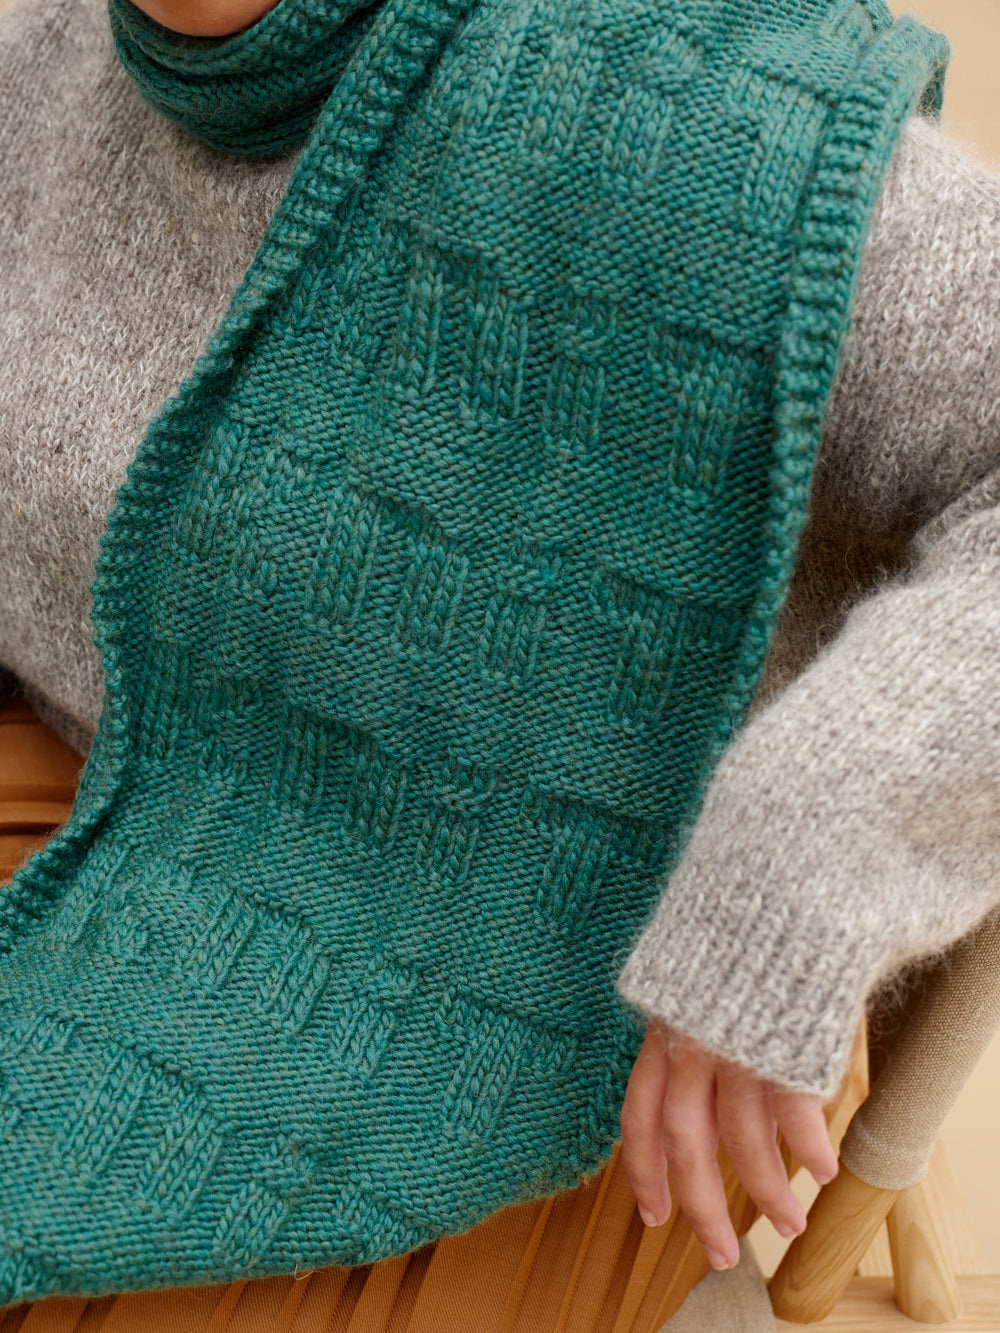 My First Knitting Book: Easy-to-Follow Instructions and More Than 15 Projects [Book]